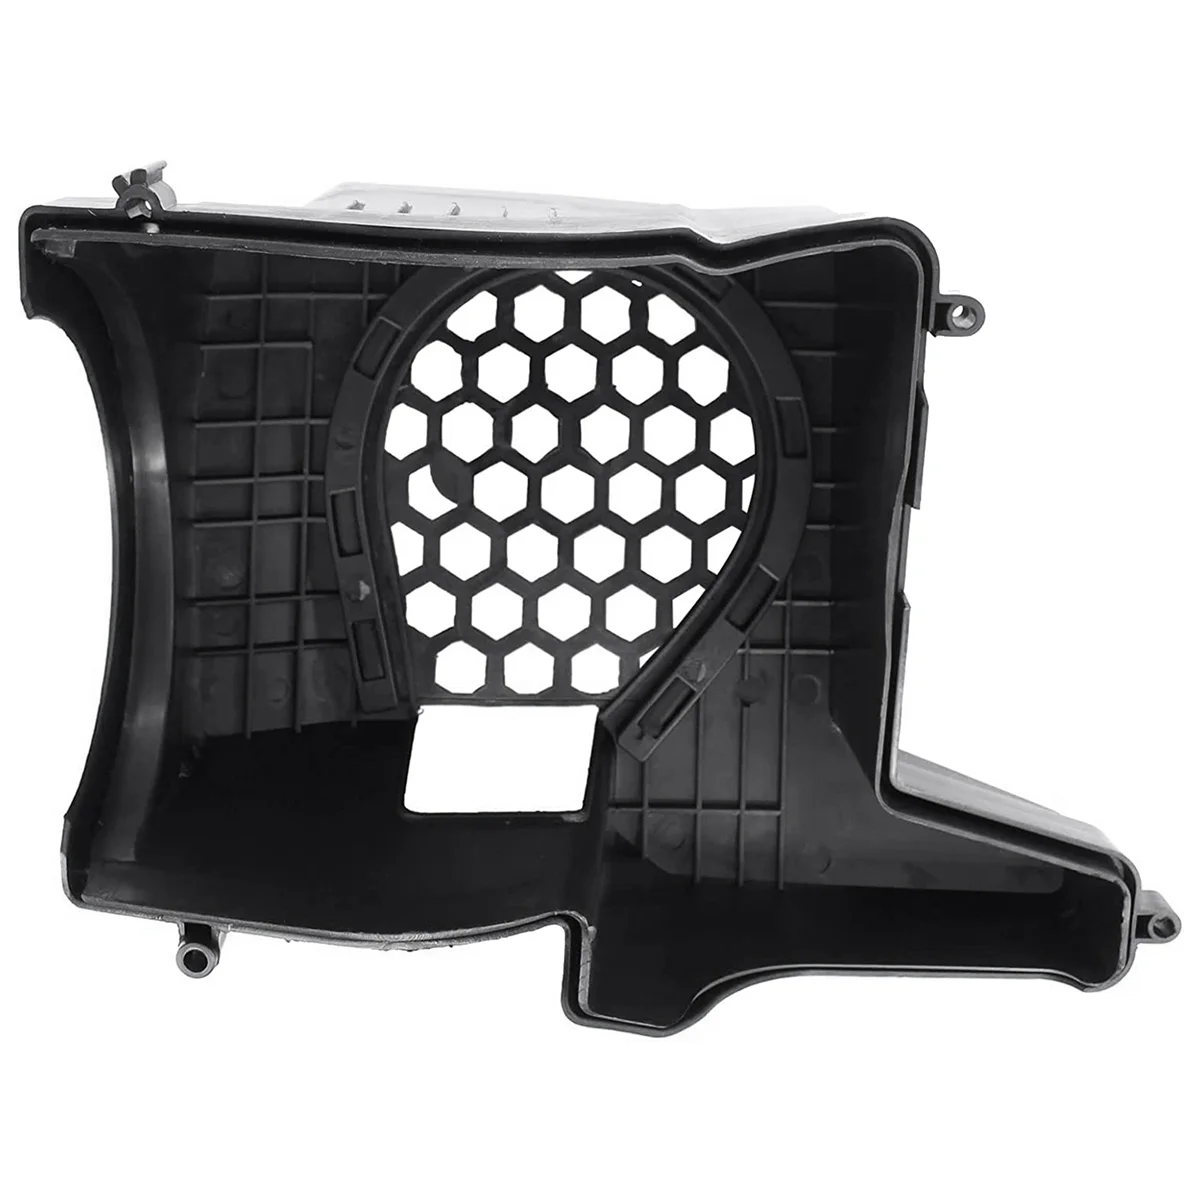 

High Flow Intake Grille Intake Cover Intake Filter Box Intake Cover Grille for Focus RS